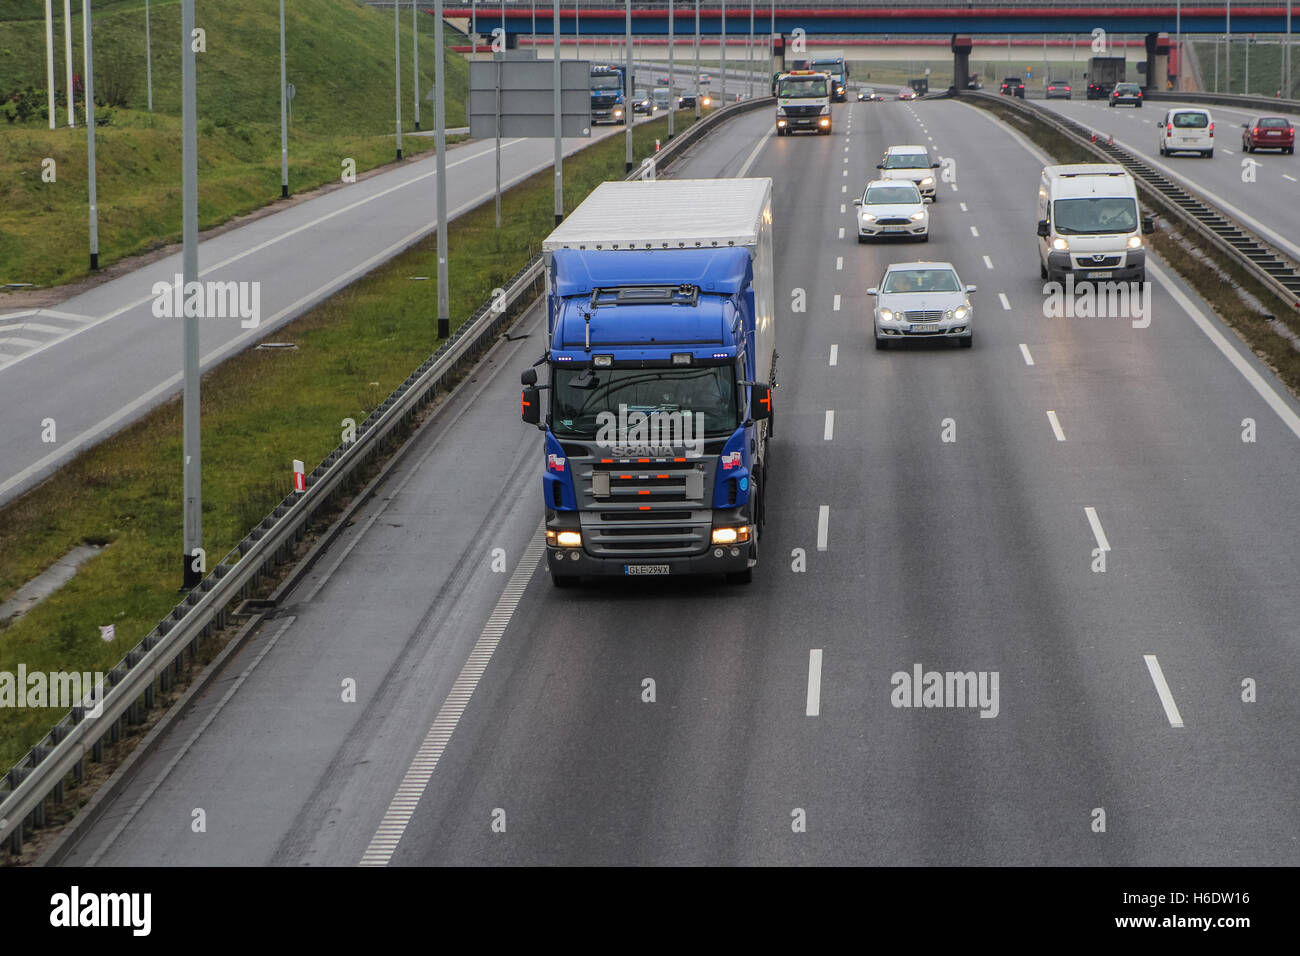 Gdansk, Poland 18 November 2016   Trucks on the Gdansk city ringroad are seen. The European Commission has decided on 17th, Nov. 2016 to refer Poland to the Court of Justice of the EU for the incorrect implementation of Council Directive 96/53/EC on maximum weights and dimensions of certain road vehicles. In particular, Poland restricts the freedom to use its road network to certain trucks even if they comply with EU standards. Credit:  Michal Fludra/Alamy Live News Stock Photo